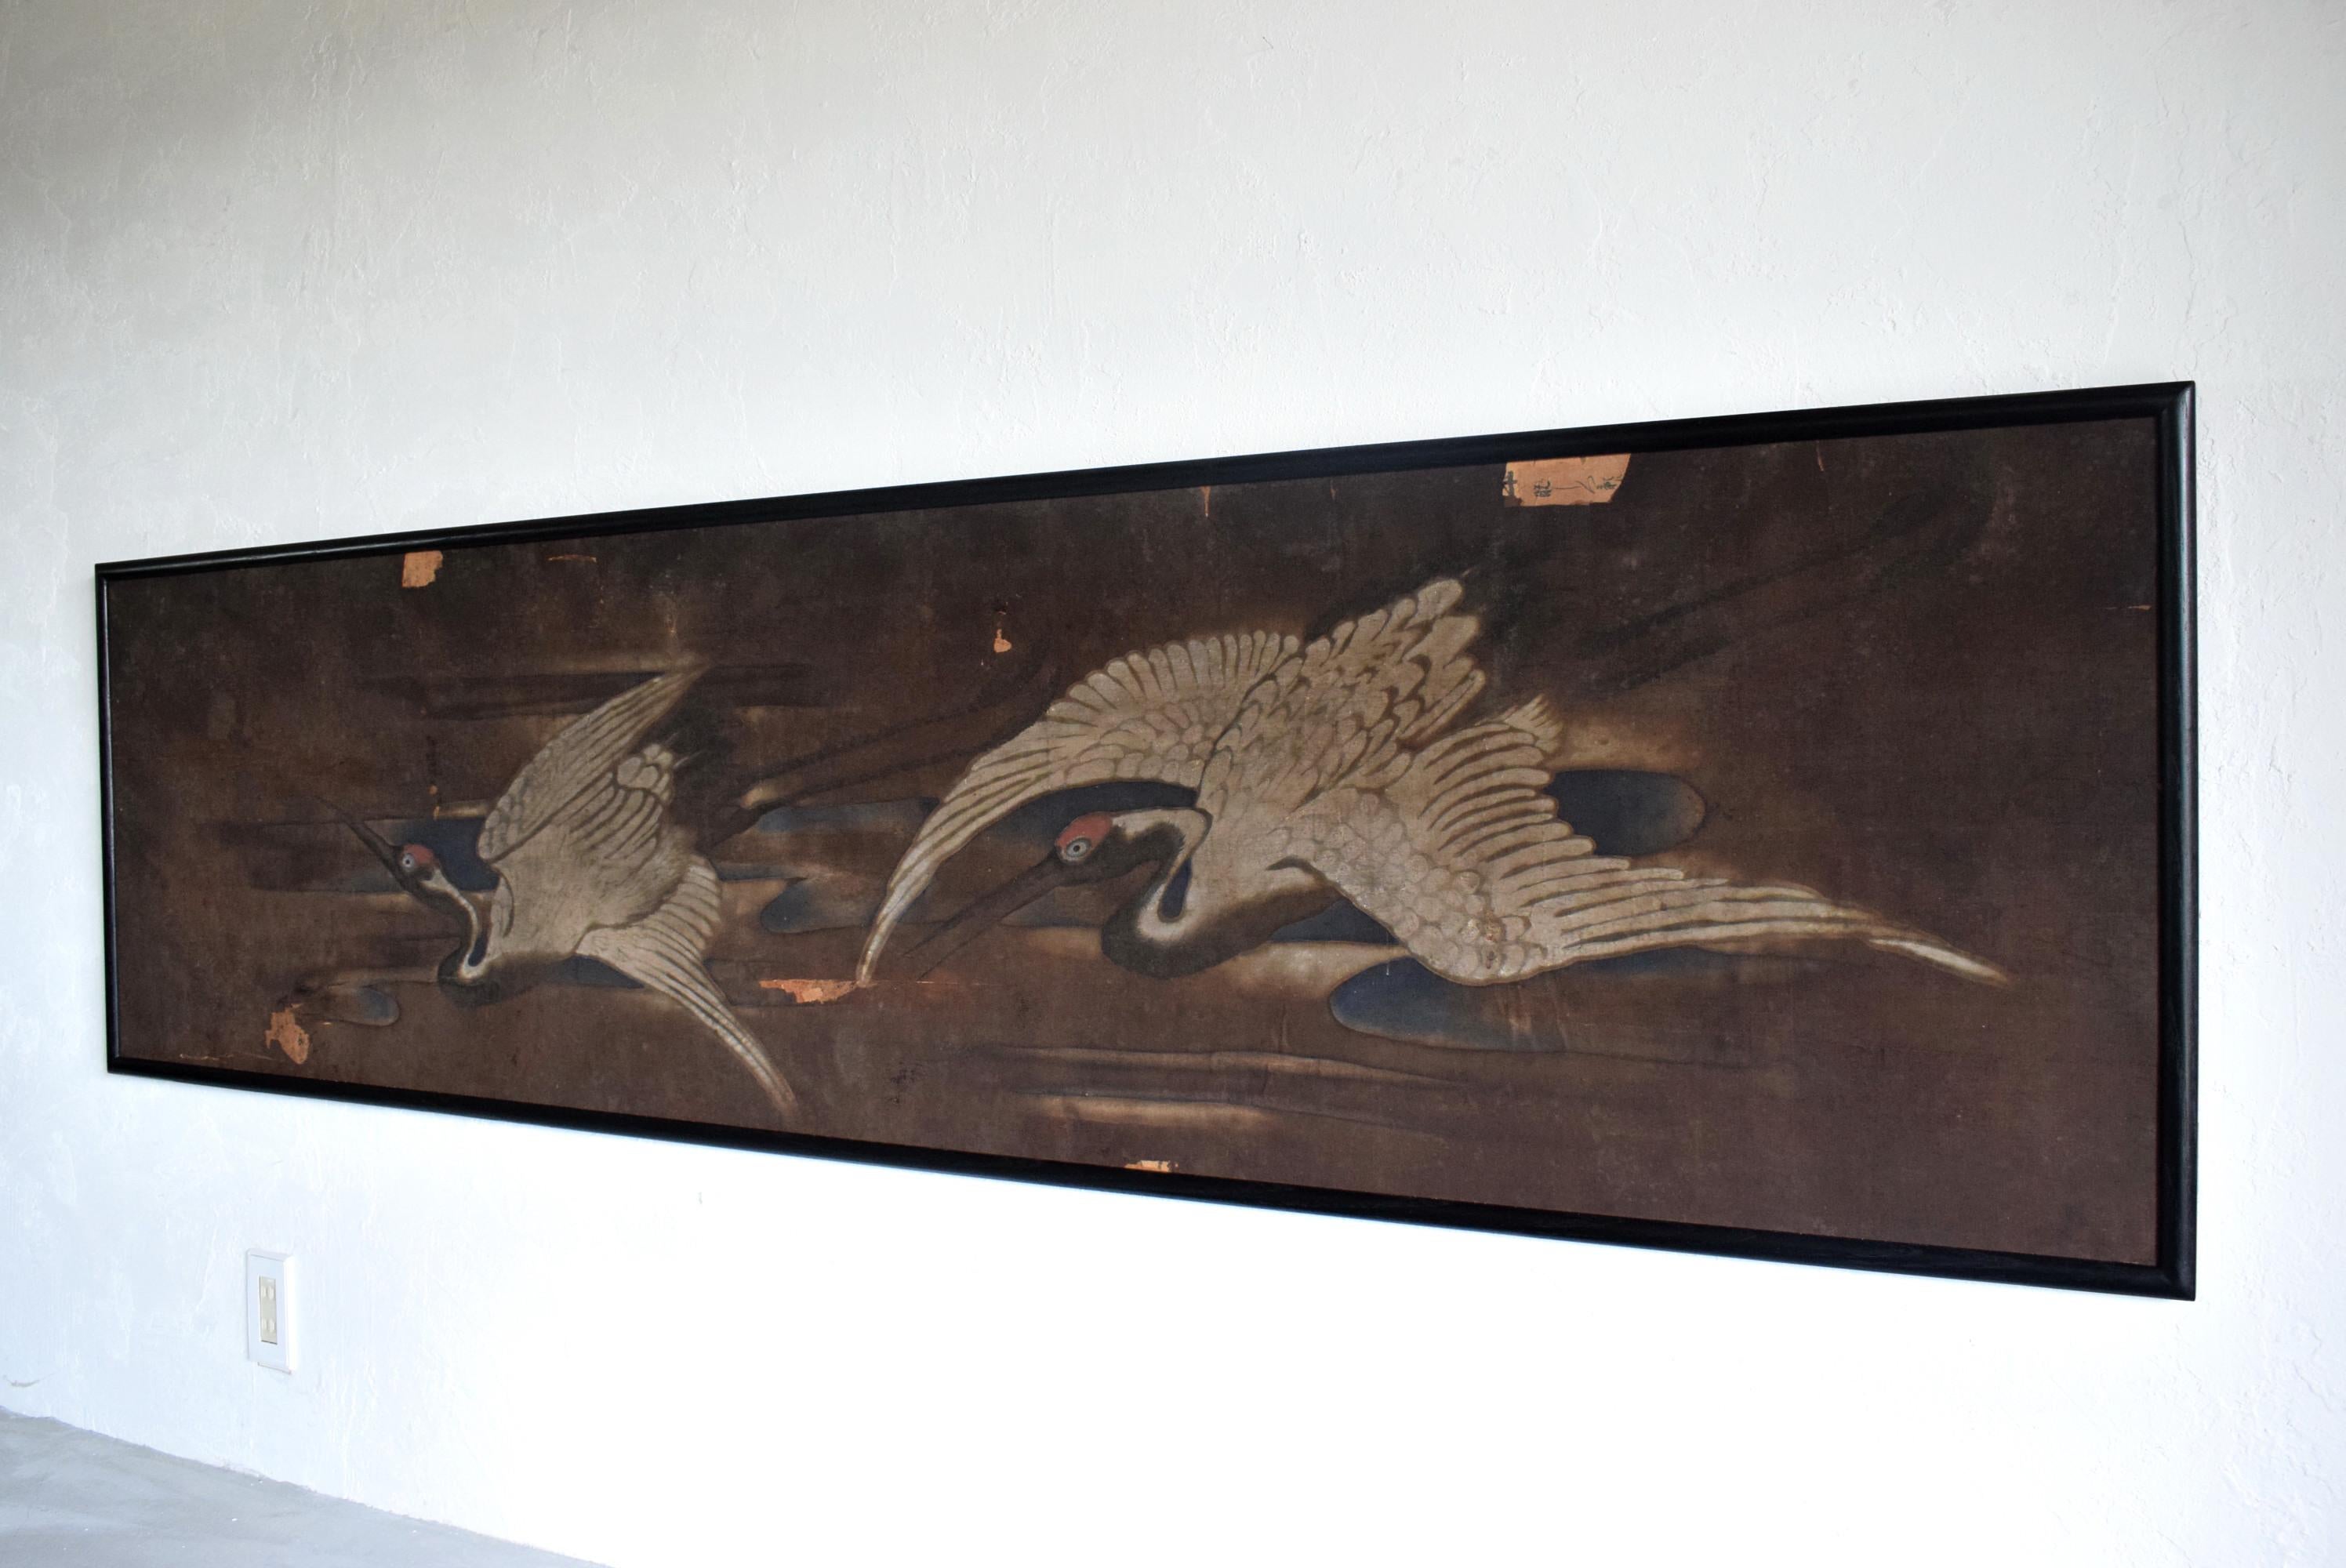 It is a framed picture of two cranes used in the space between the columns in the Meiji era.

The frame is made of chestnut and the color is like lacquer.

Size: W 203 D 3.5 H 50.5(cm)
Weight about 9kg.